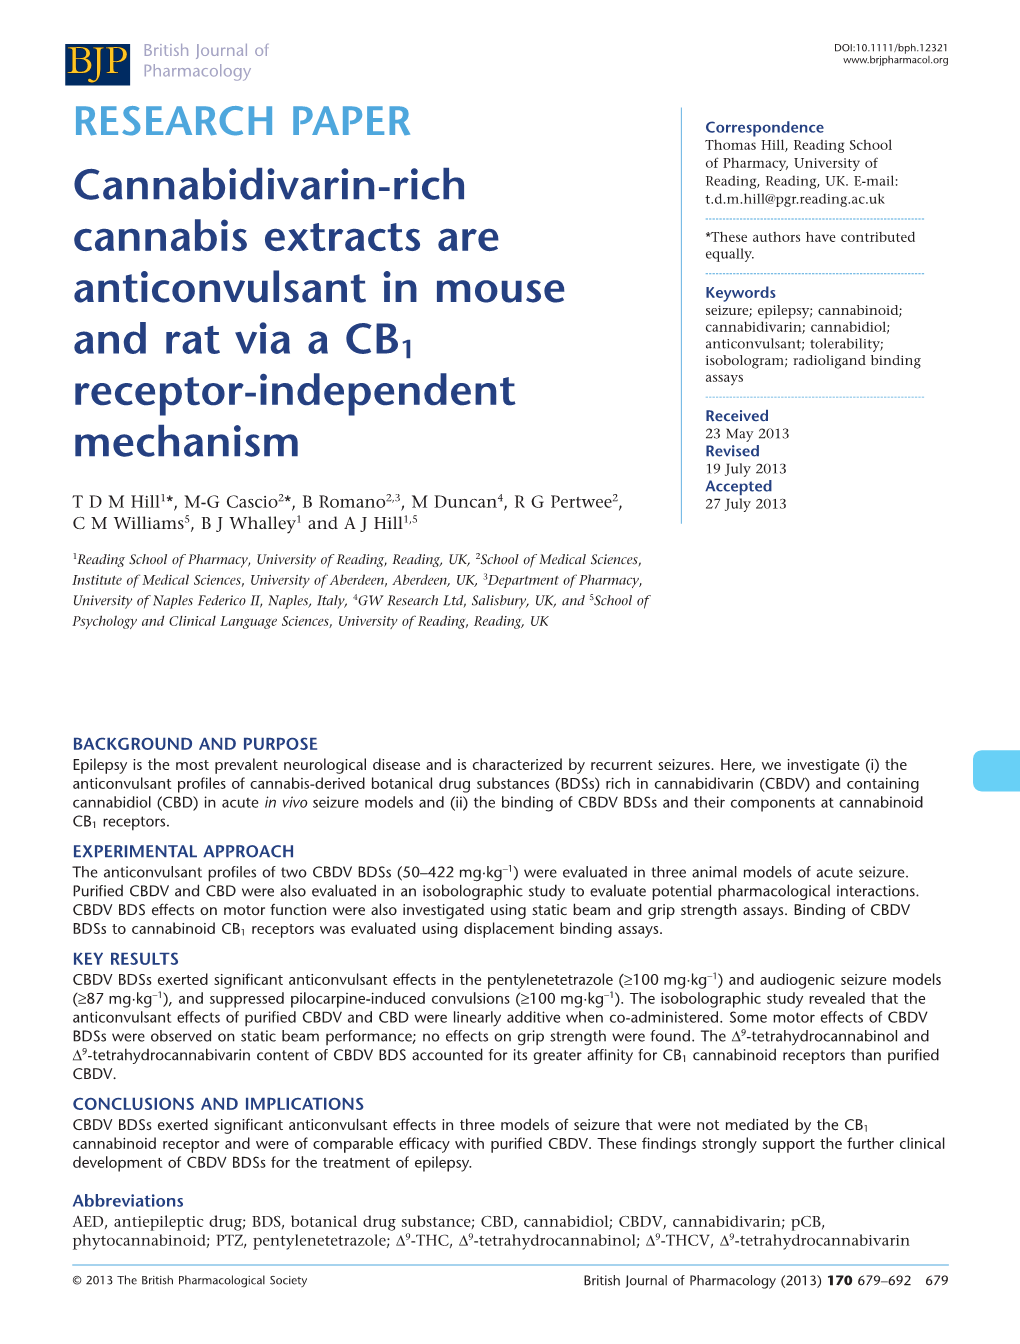 Cannabidivarin-Rich Cannabis Extracts Are Anticonvulsant in Mouse and Rat Via a CB1 Receptor-Independent Mechanism